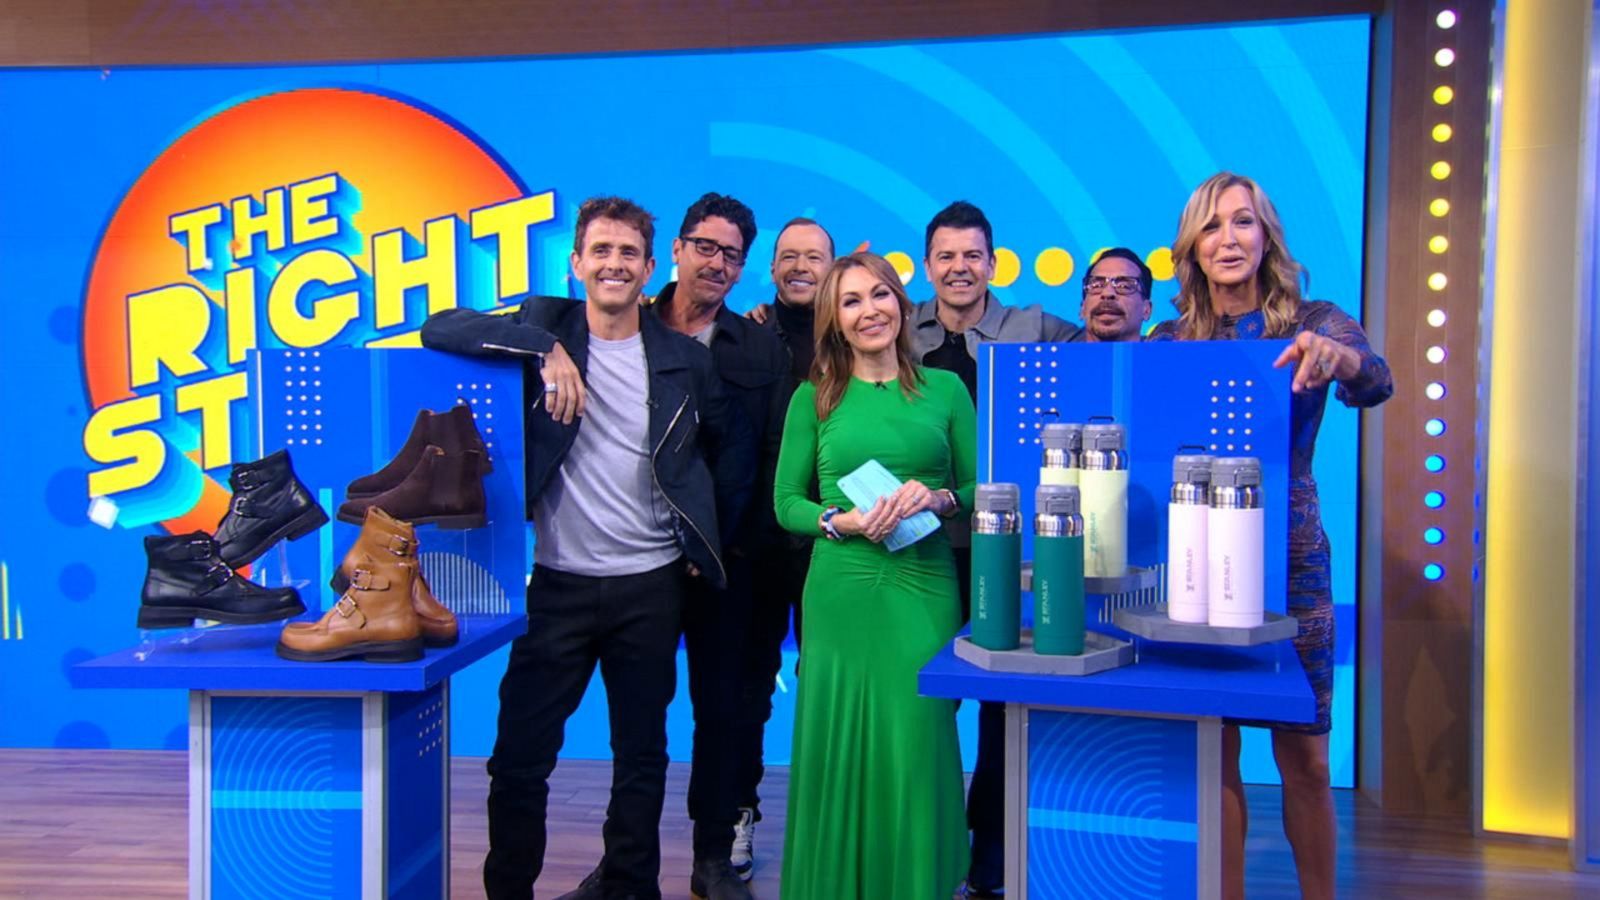 Shop the best of 'The Right Stuff' - Good Morning America